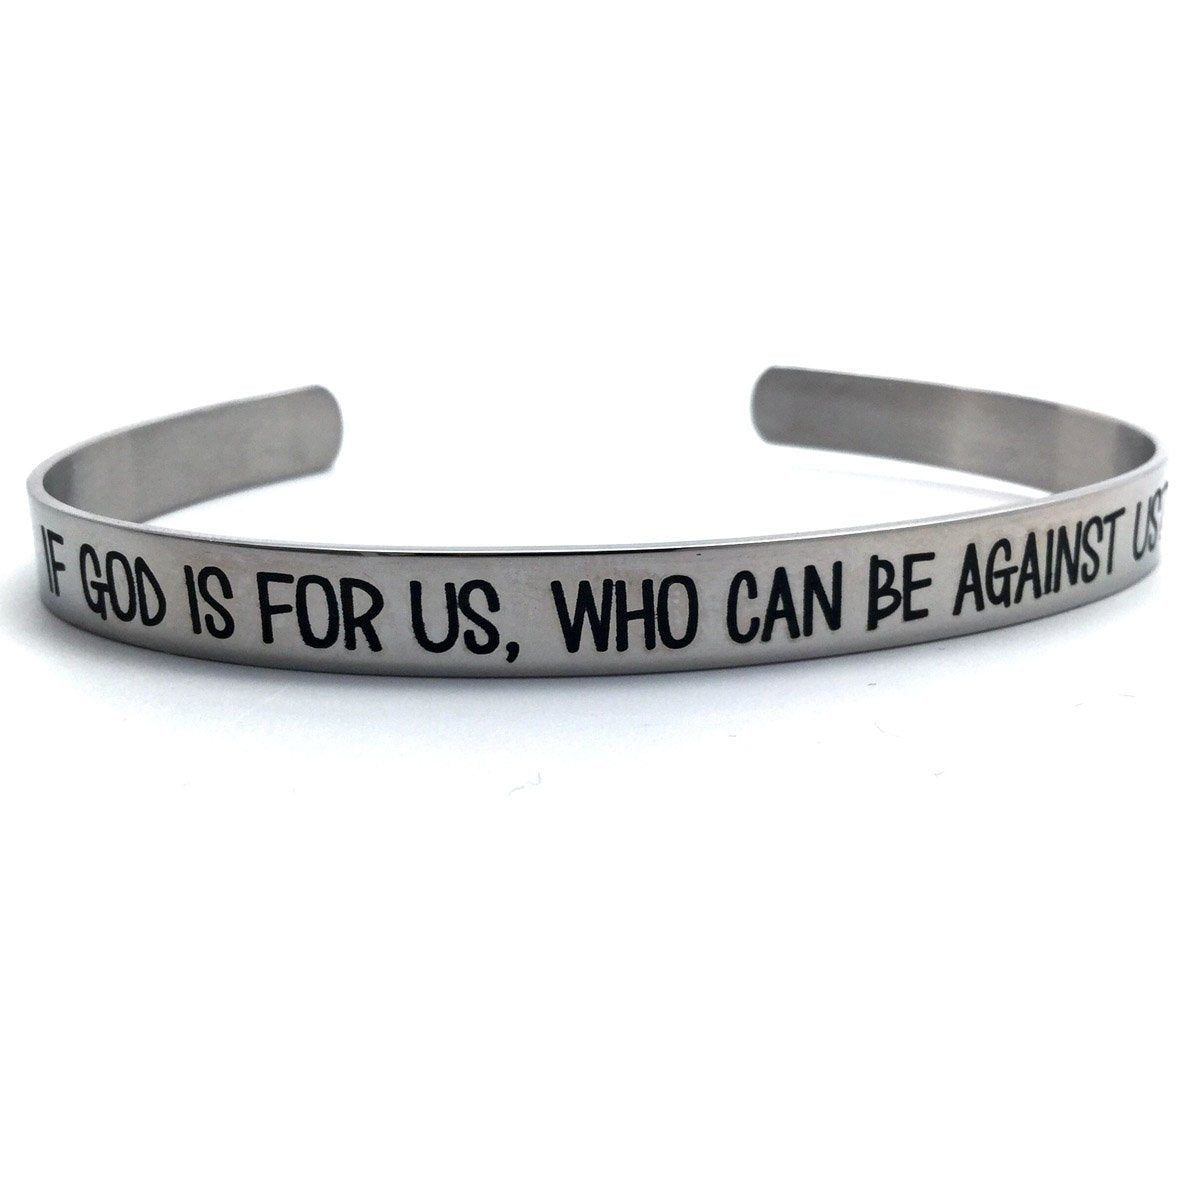 If God is for us Bracelet - Forgiven Jewelry